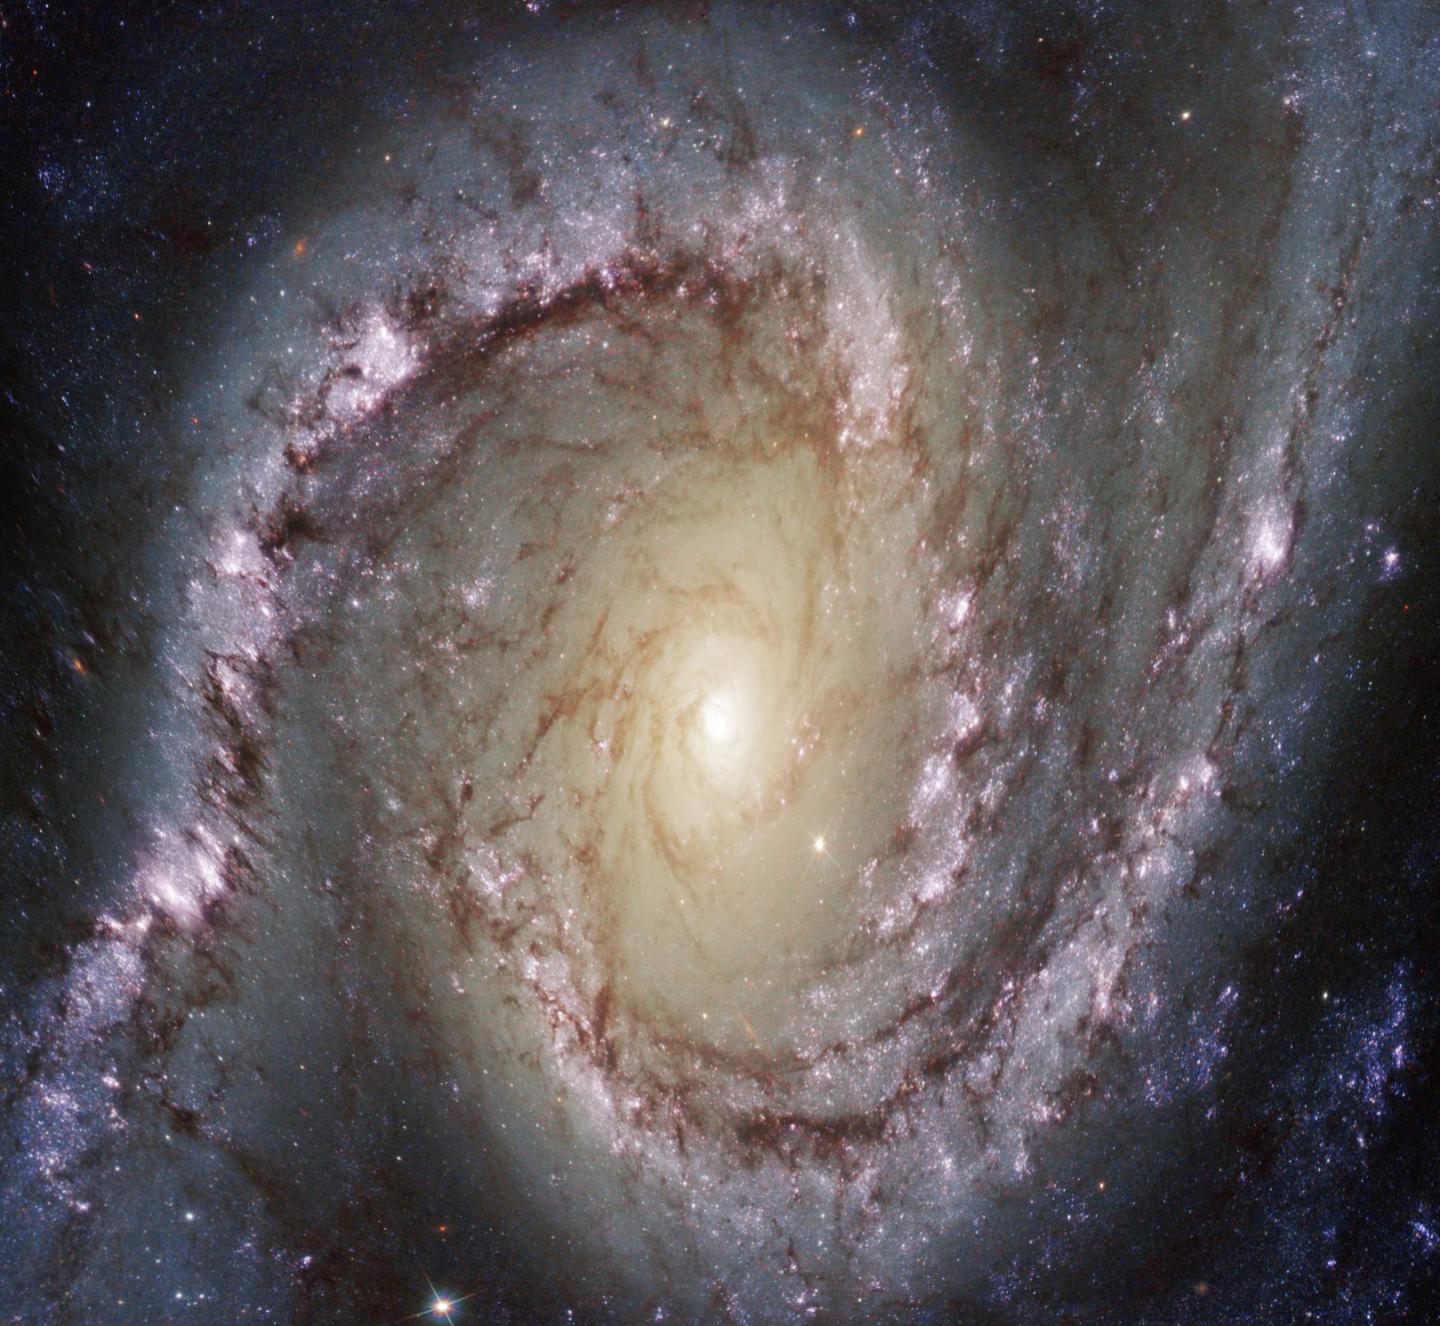 Processed image of a distorted spiral galaxy